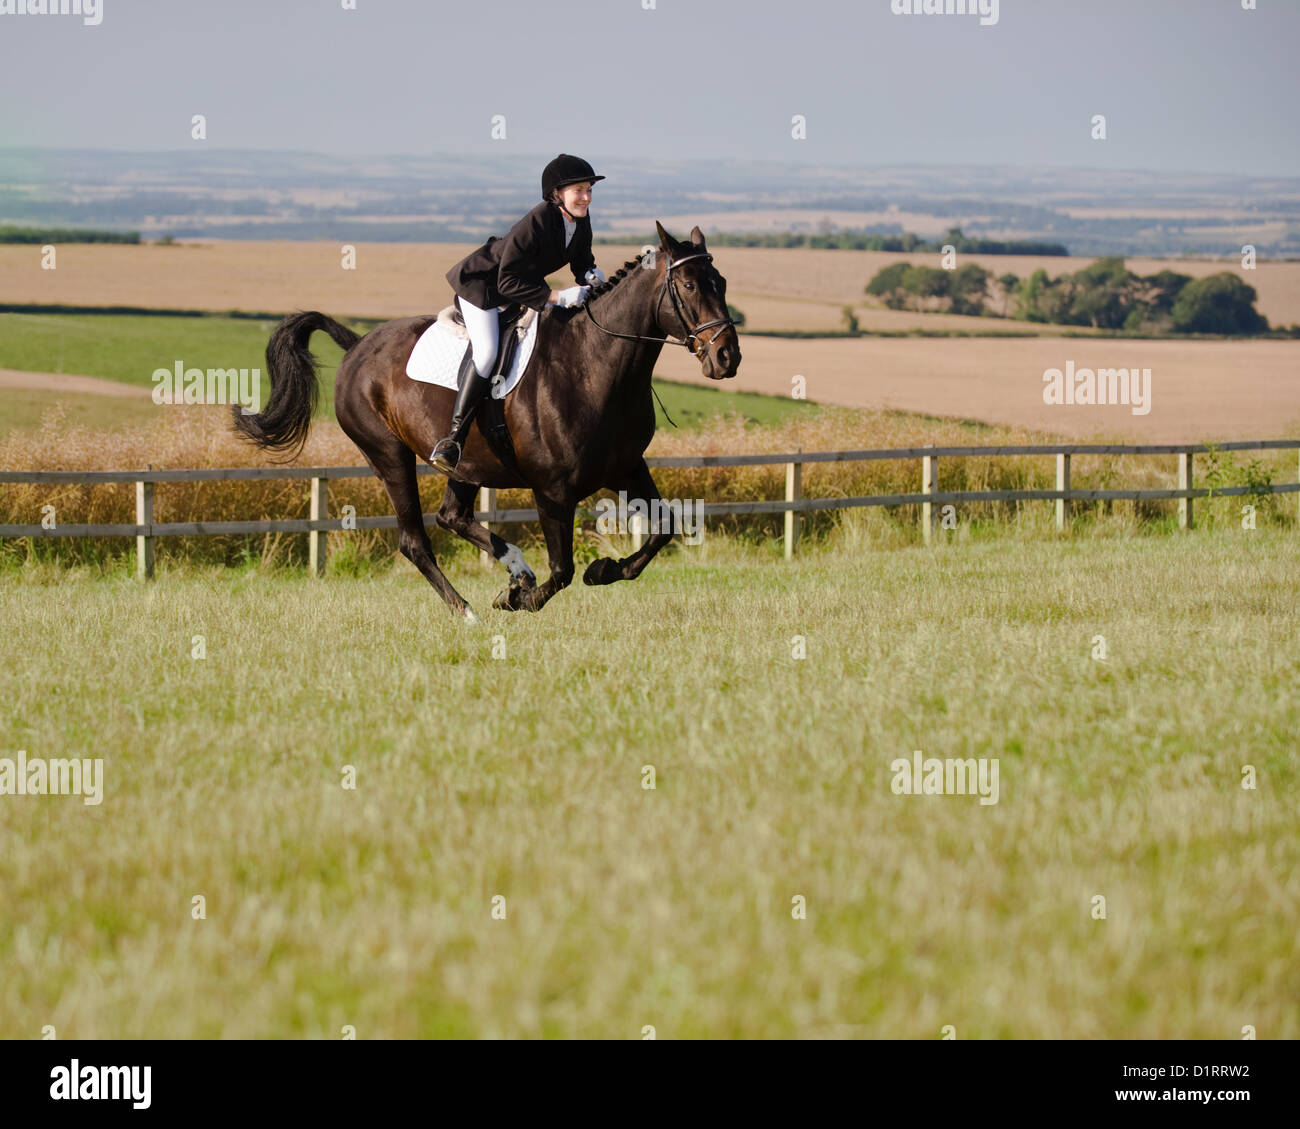 Horse and rider at gallop across a field with stunning views behind. Shows girl on horse riding on summer day. Stock Photo